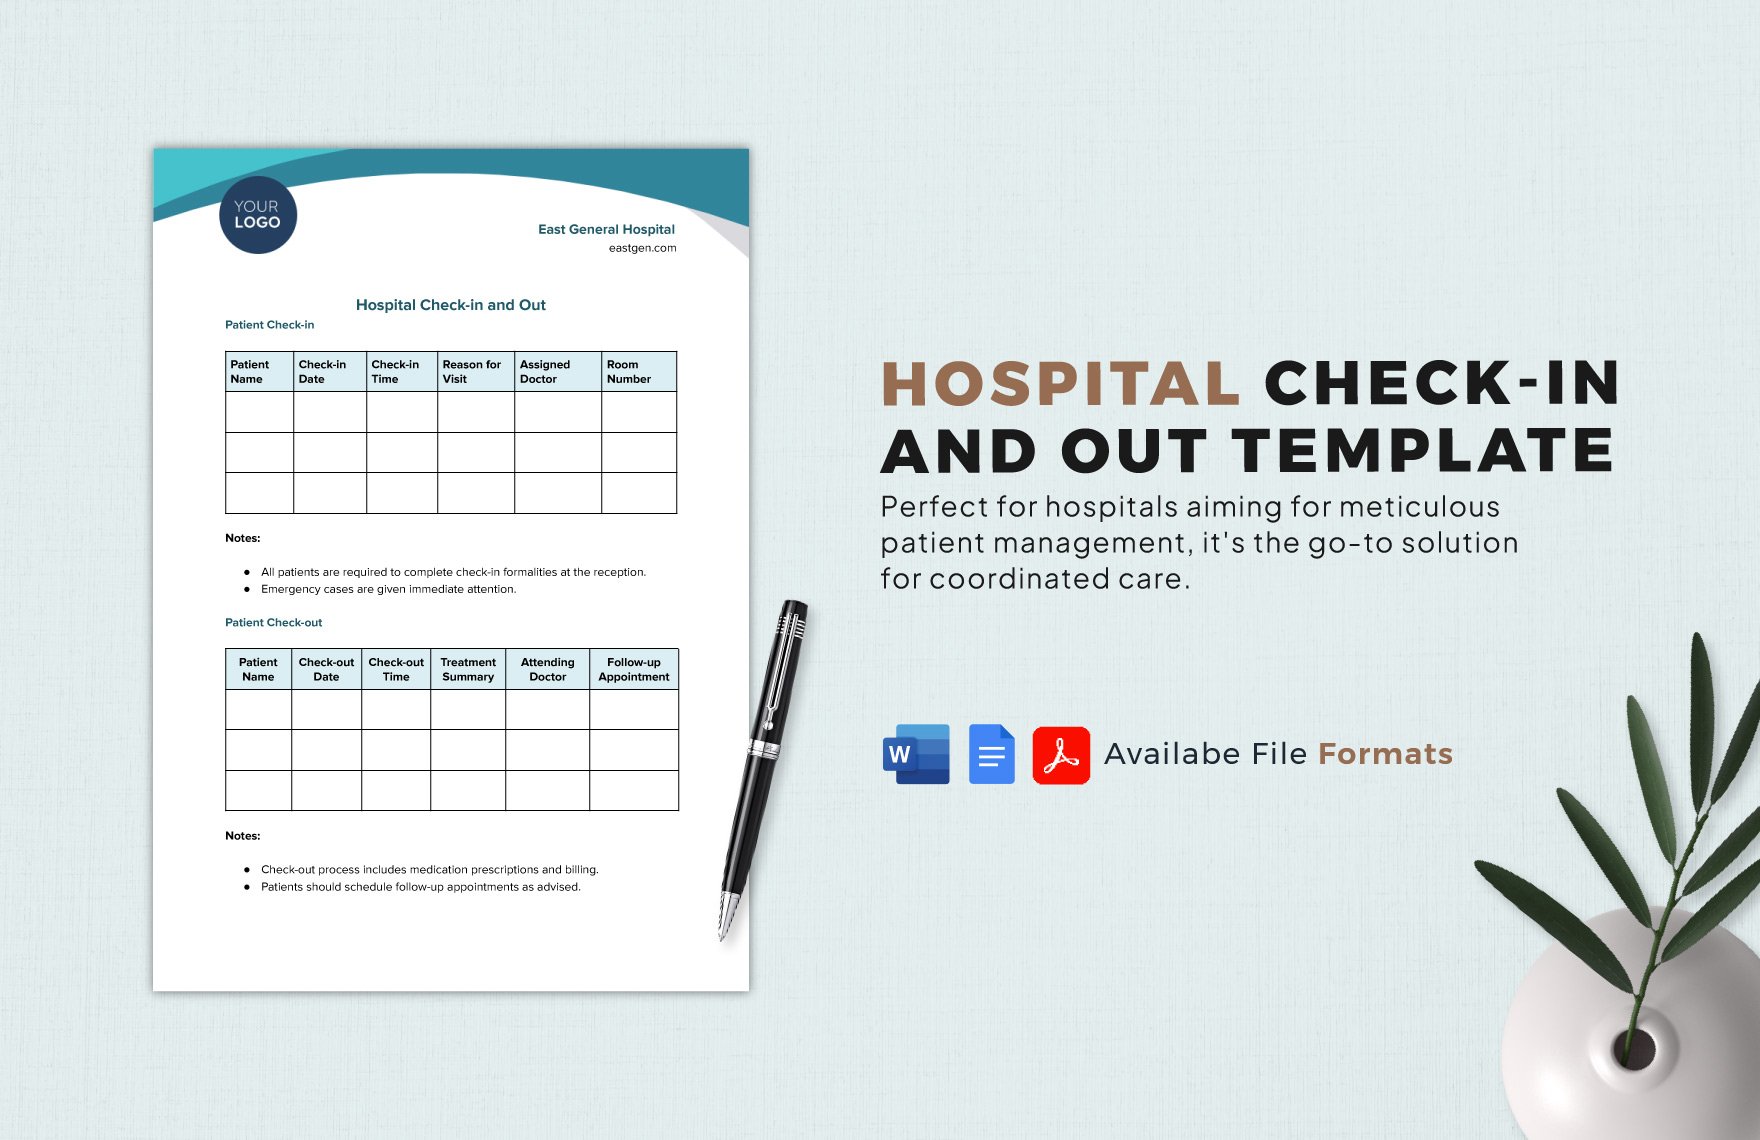 Hospital Check-in and Out Template